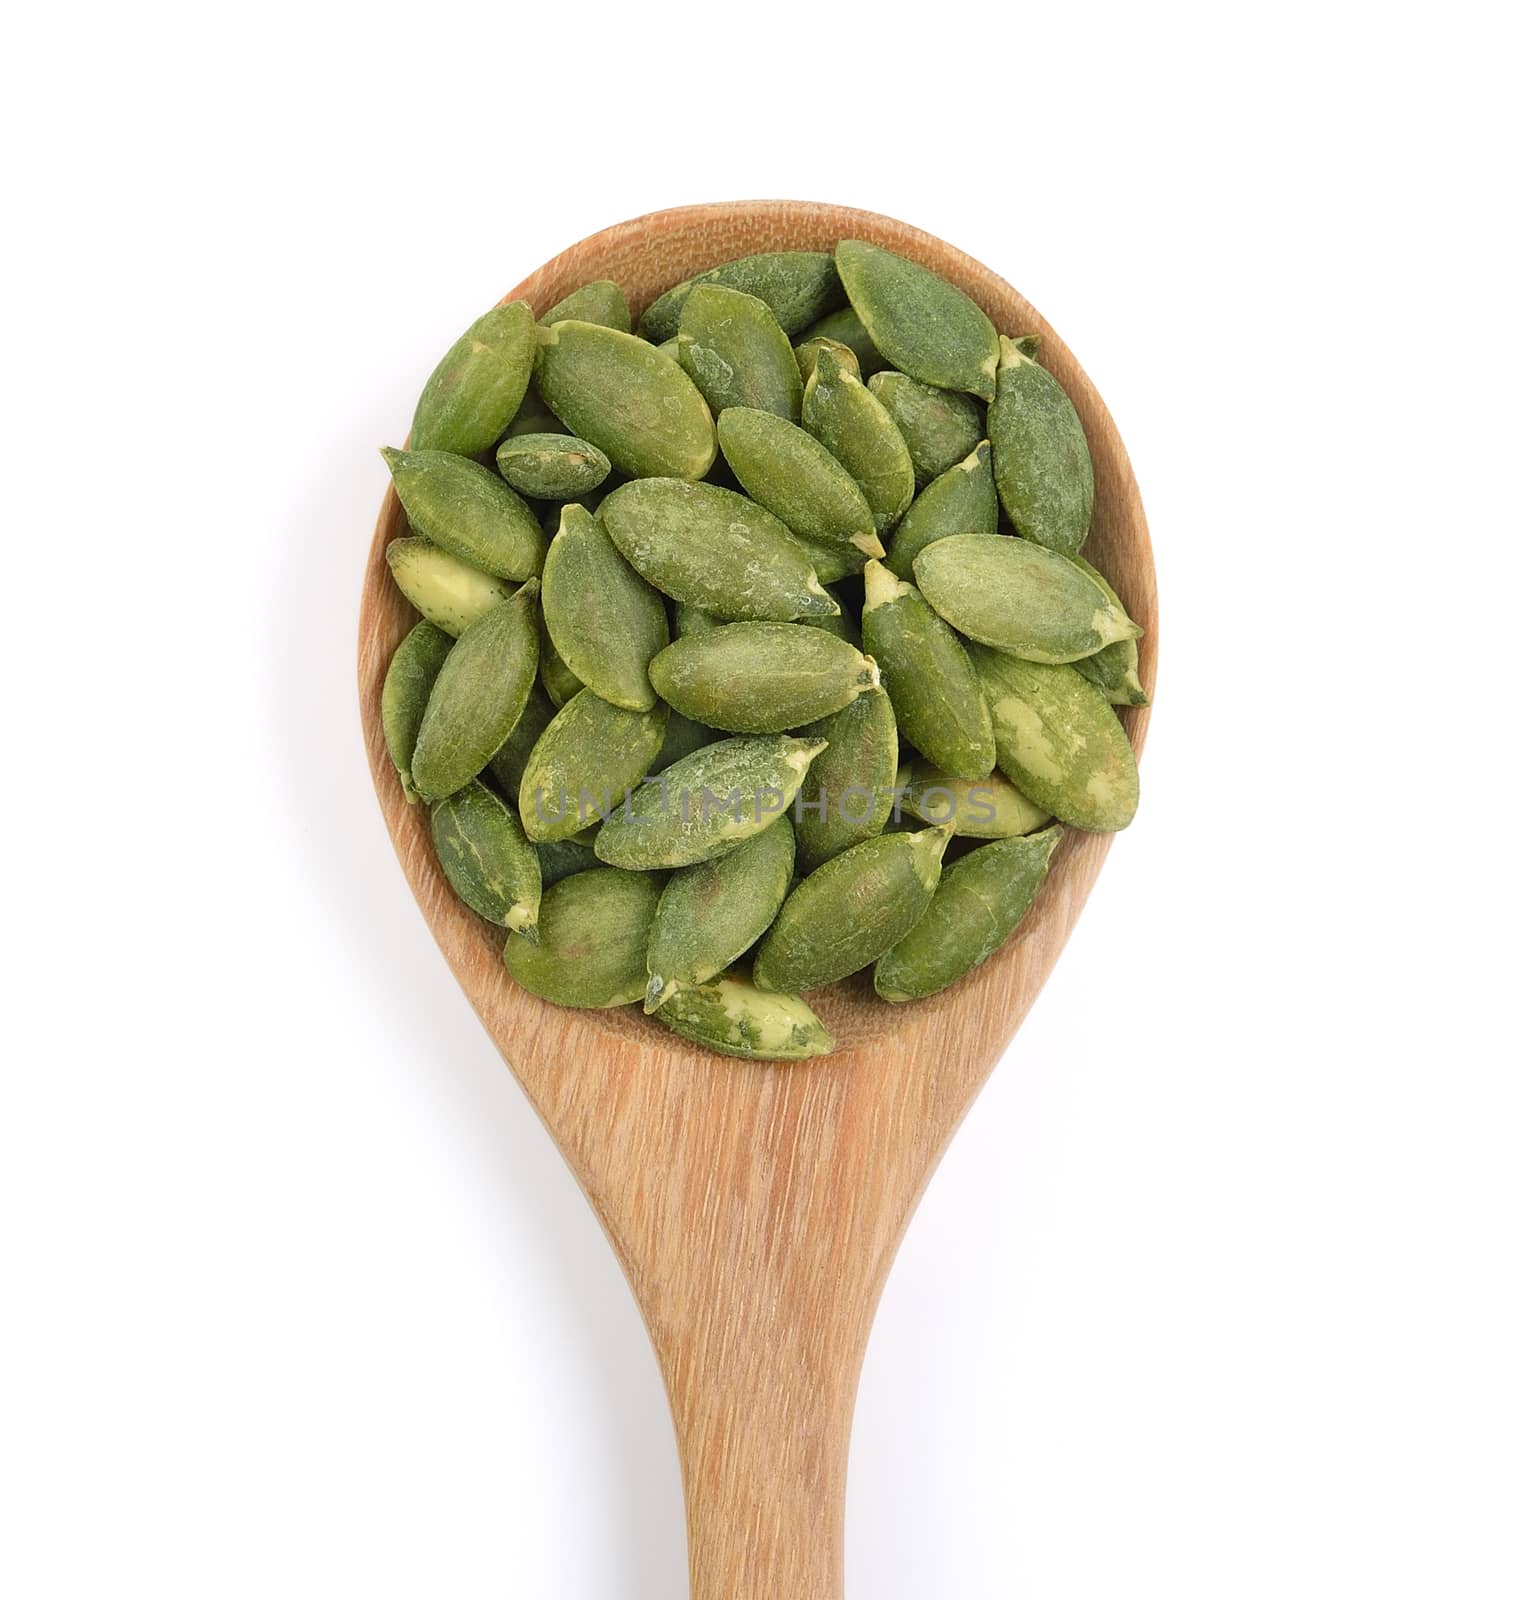 pumpkin seeds in the spoon on white background